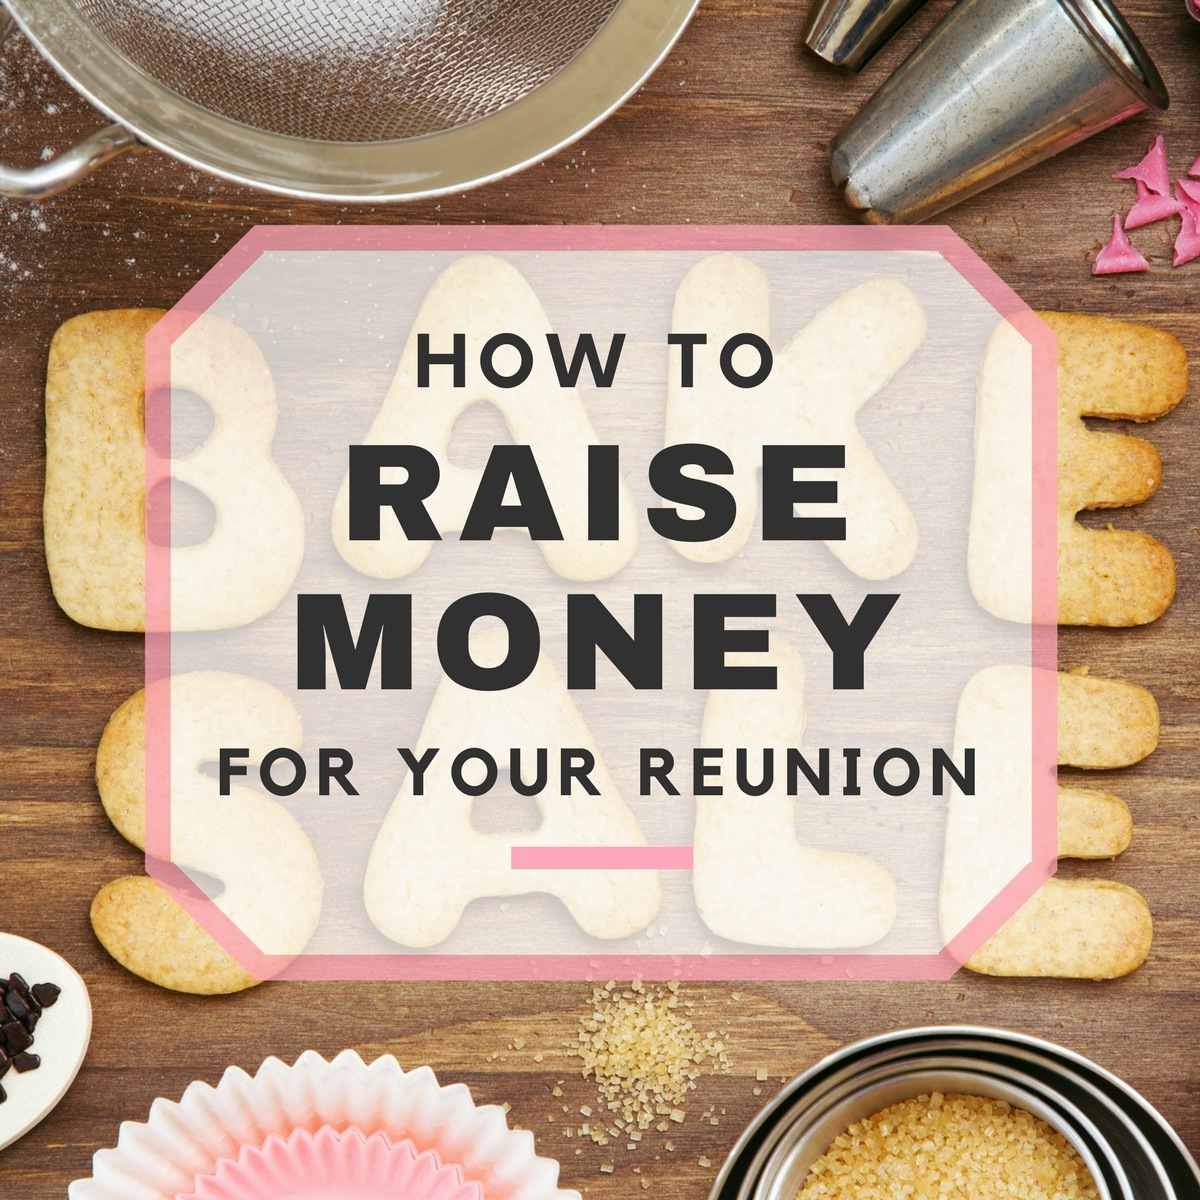 10 Ways to Raise Money for Your Reunion